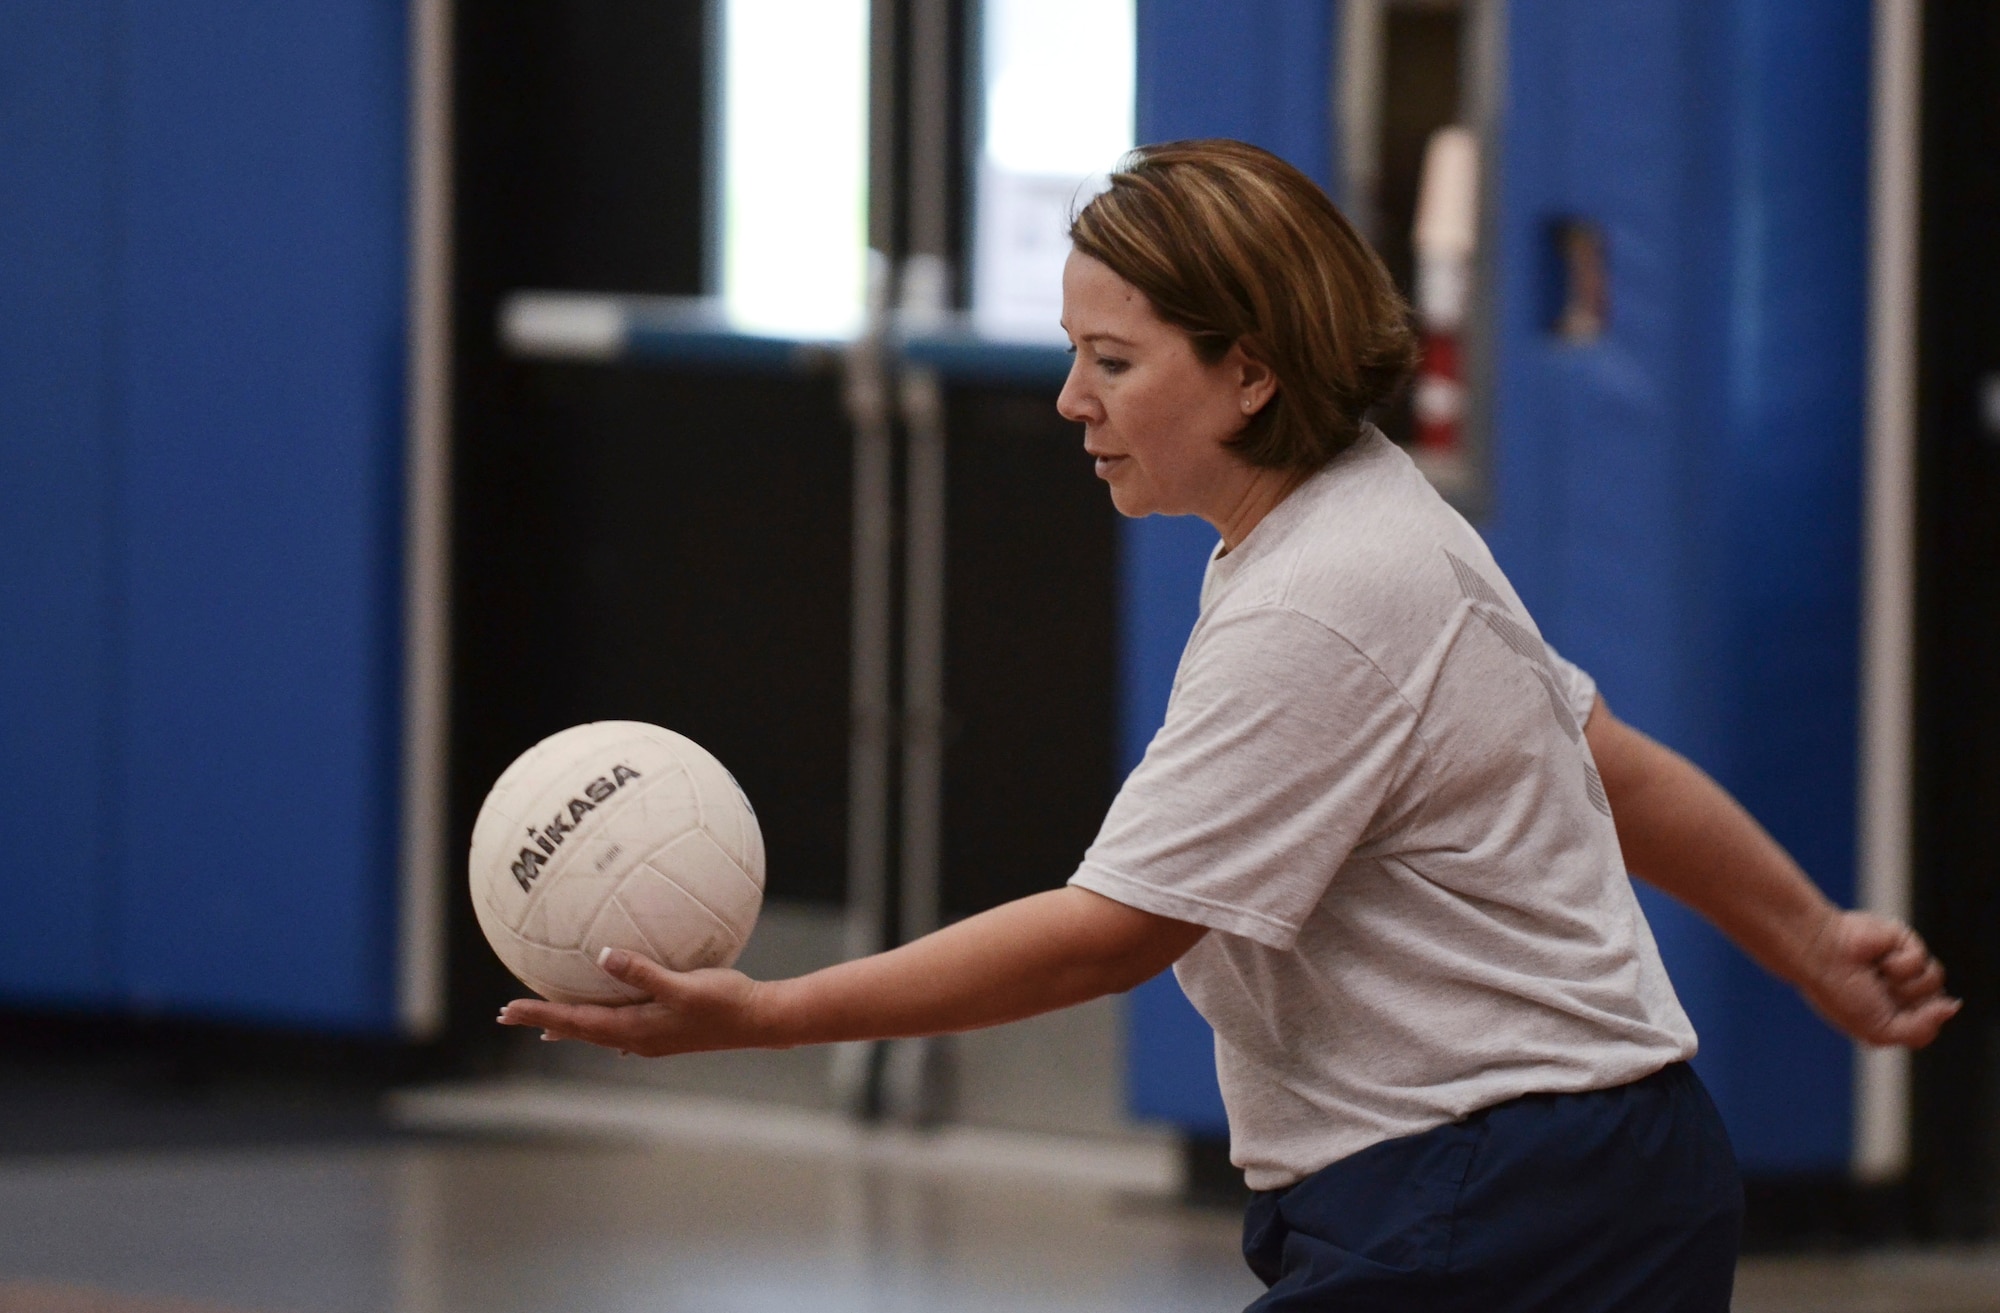 Rena Banes, 36th Maintenance Group first sergeant, serves the ball during a volleyball game Dec. 2, 2013, at the Coral Reef Fitness Center on Andersen Air Force Base, Guam. The “ALS versus Shirts” volleyball game between Airman Leadership School students and first sergeants is an Air Force-wide tradition. The 36th Wing first sergeants defeated the ALS students, 3-1 sets. (U.S. Air Force photo by Senior Airman Marianique Santos/Released)